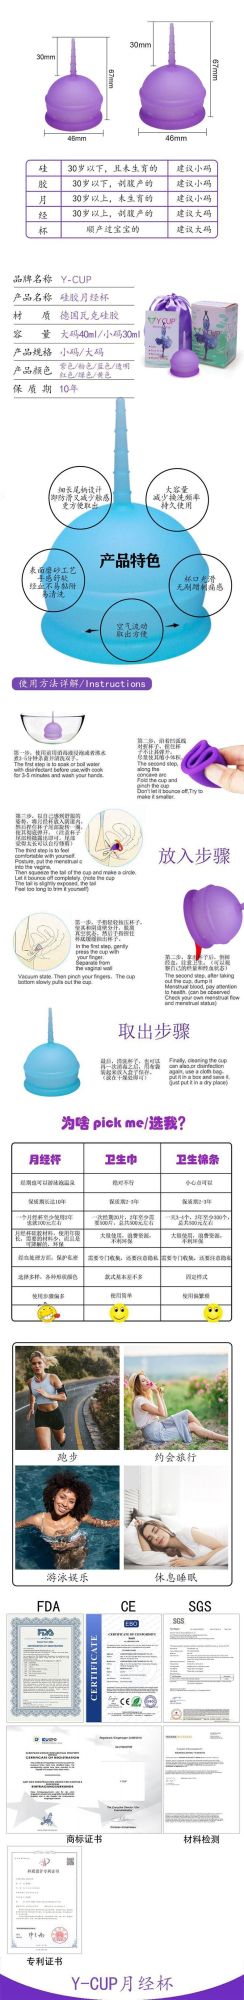 Silicone Menstrual Cup Instead of Sanitary Napkin Aunt Cup, Female Care Menstrual Partner Menstrual Cup